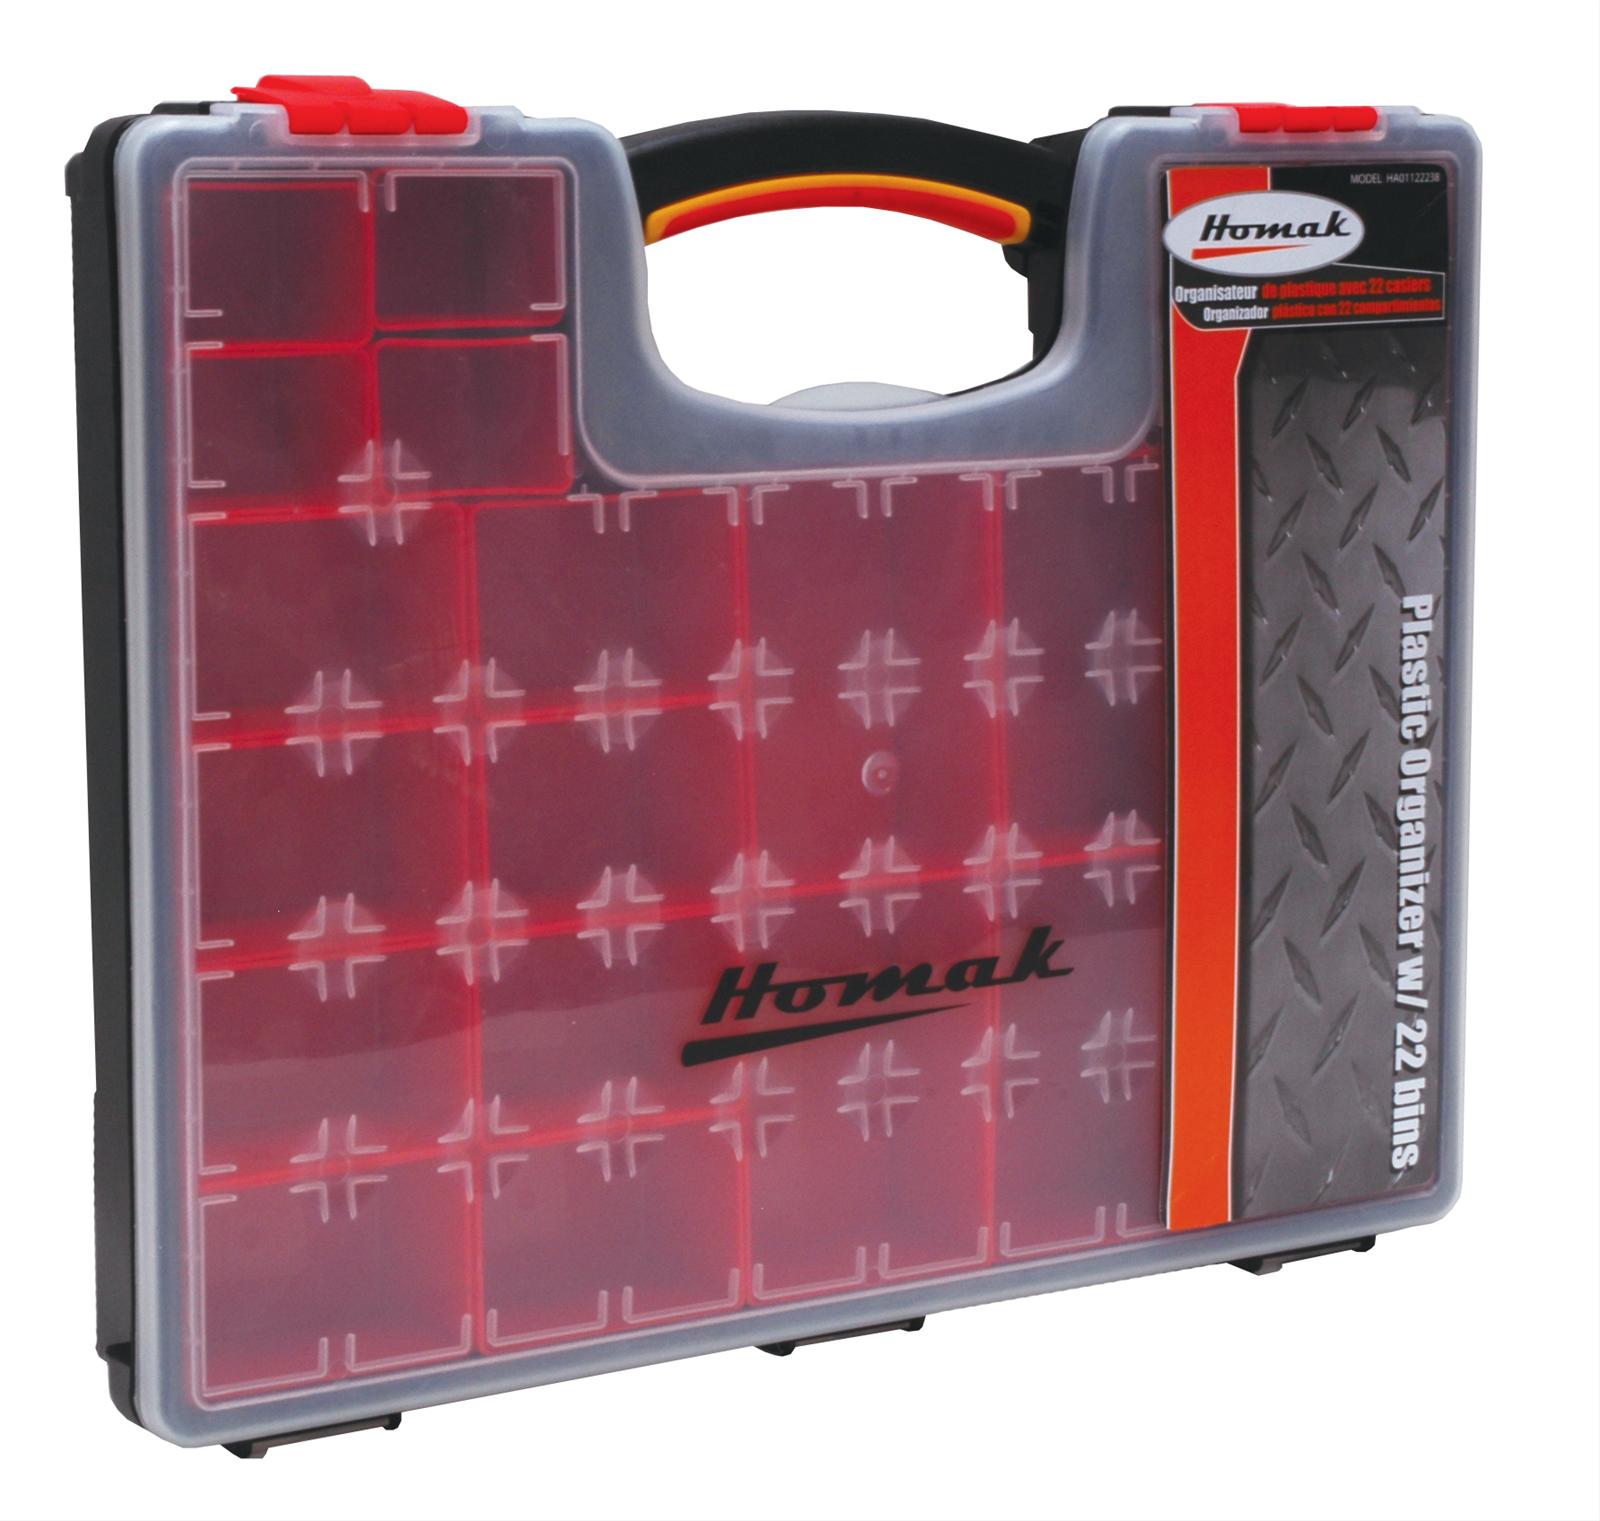 Homak Toolboxes HA01122238 Homak Portable Organizers with Removable Bins